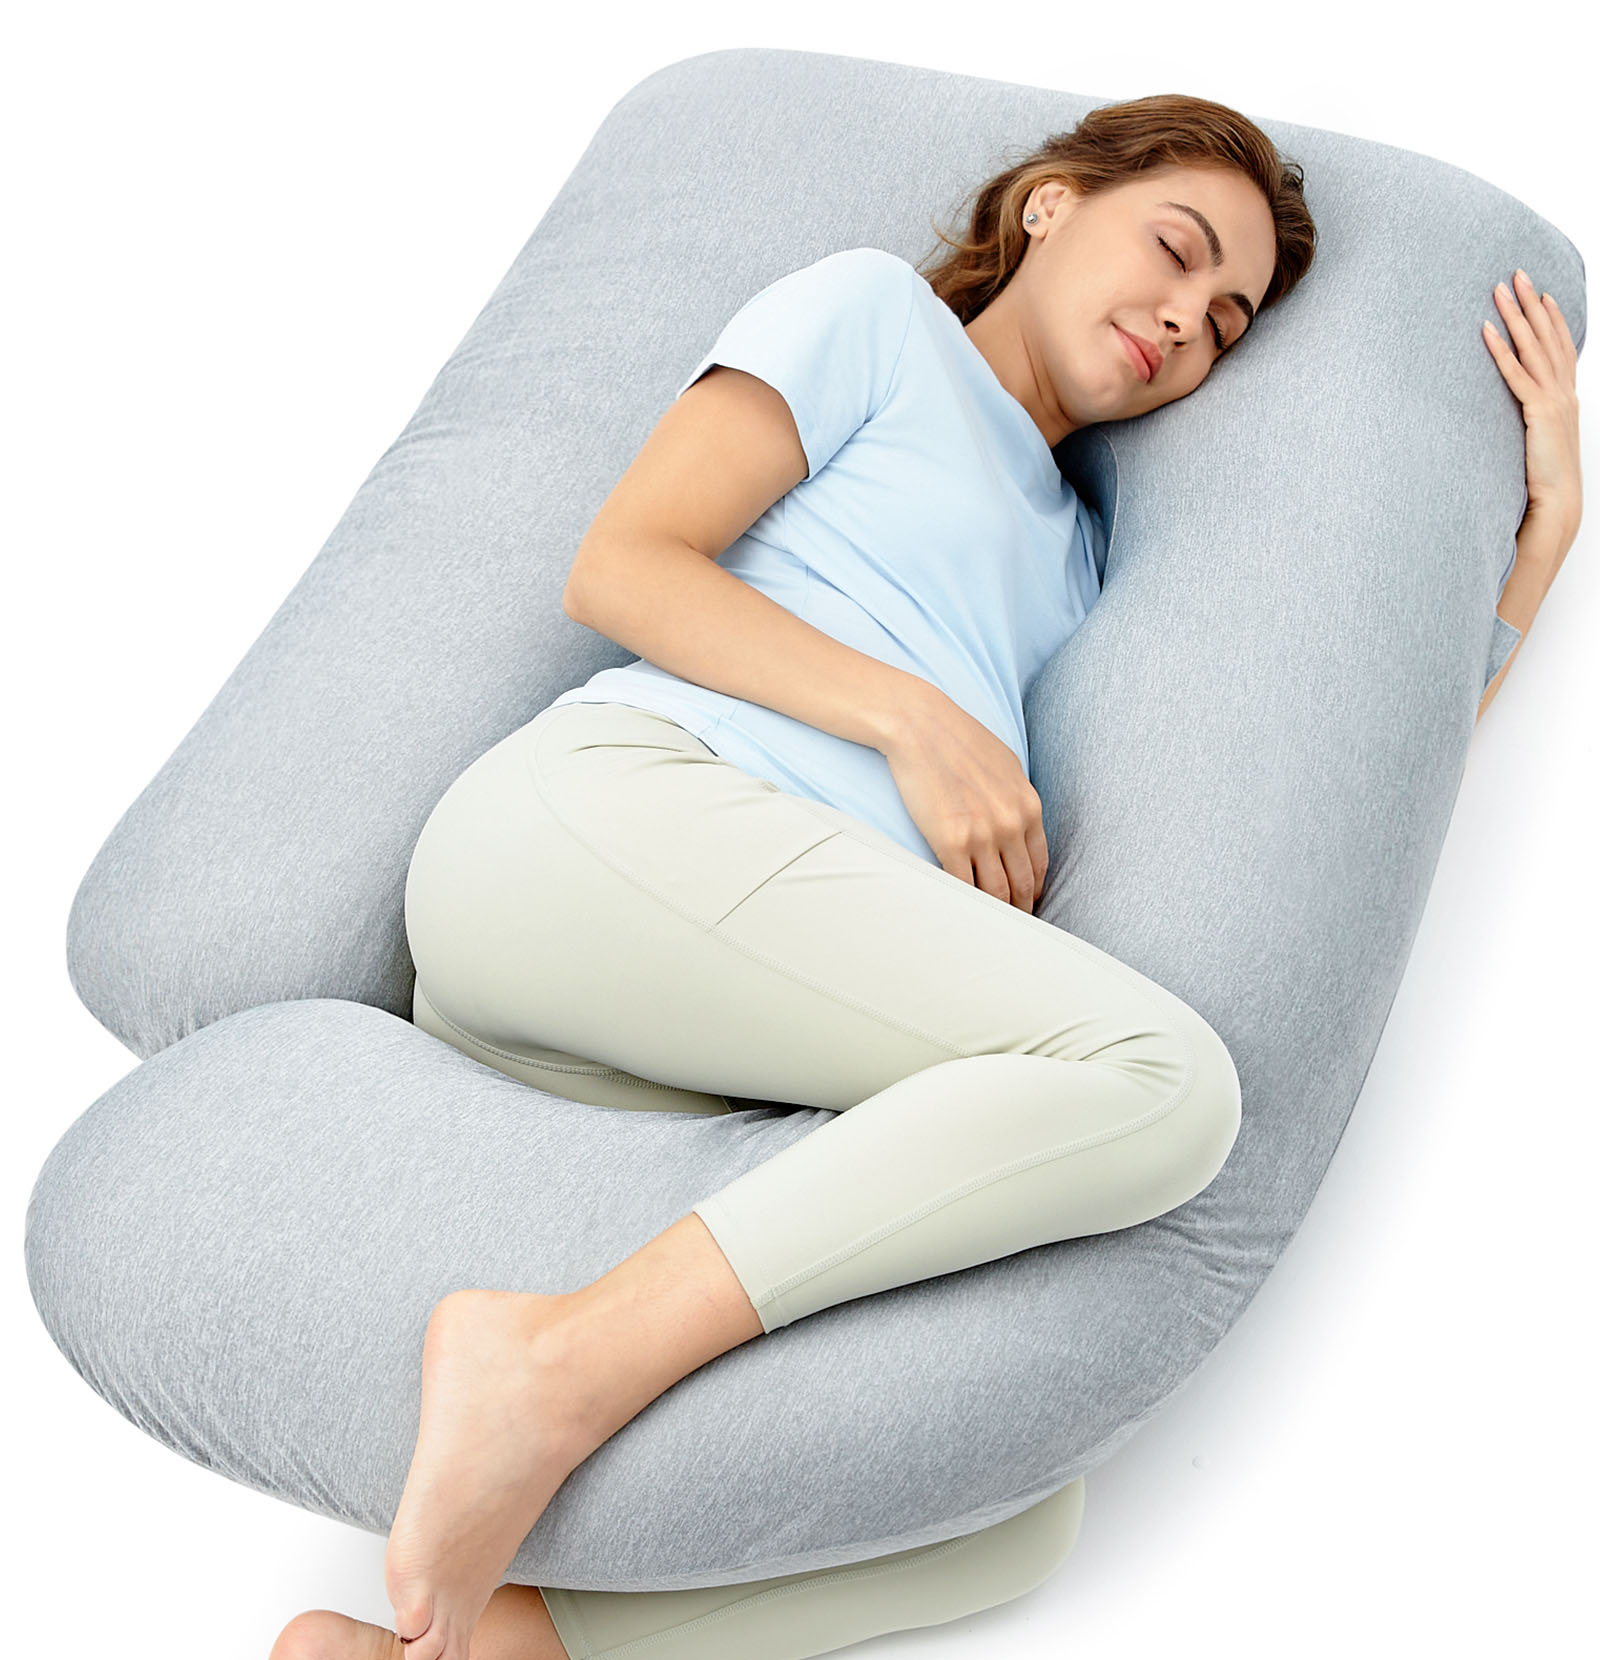 Momcozy U Shaped Cooling Fabric Pregnancy Pillow Gray MCMYZ01